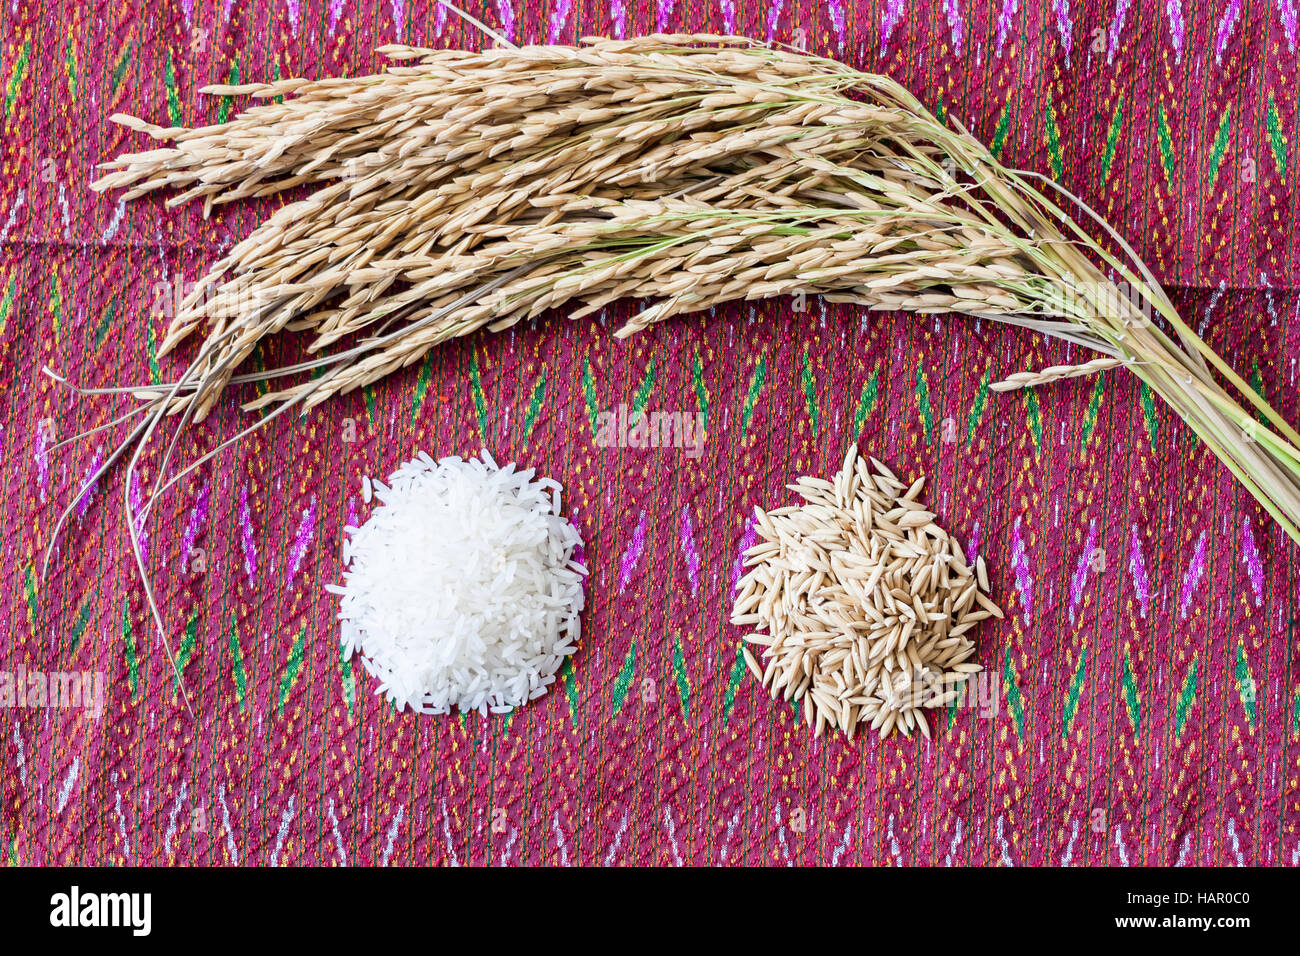 Agriculture Rice Seed Stock Photo